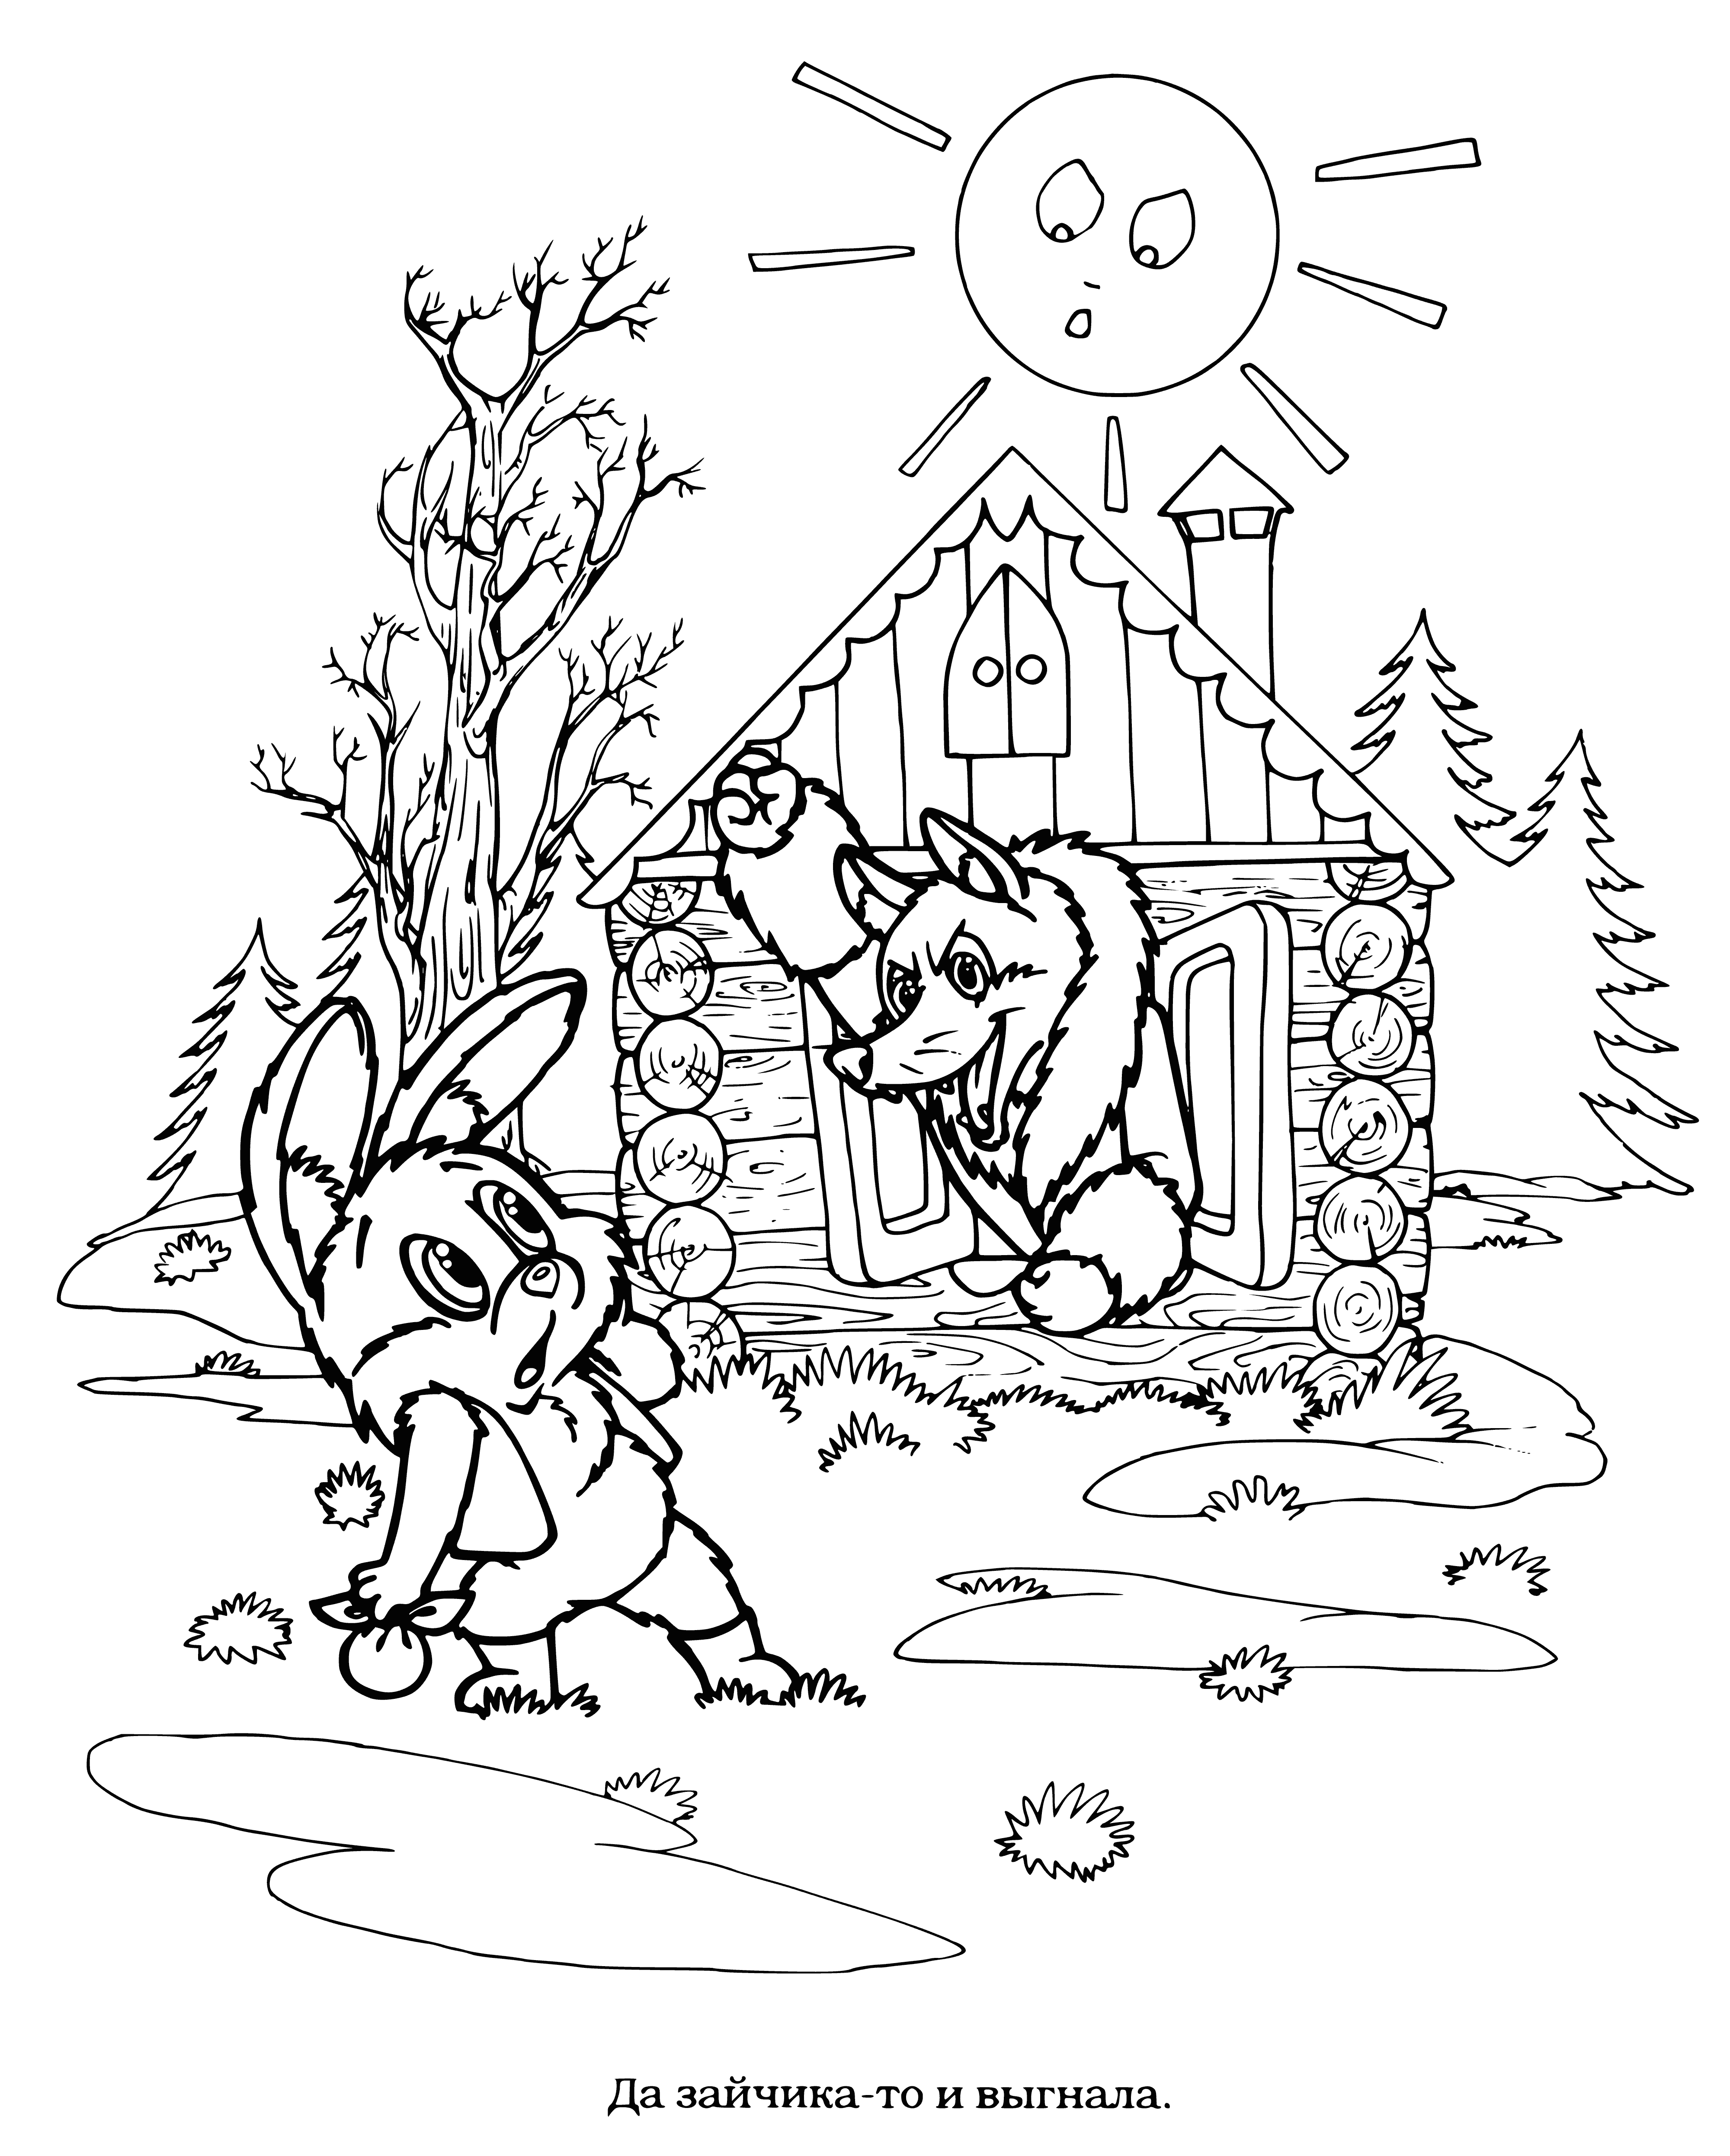 coloring page: Fox kicks bunny out of tree hole, bunny flies with flapping ears.